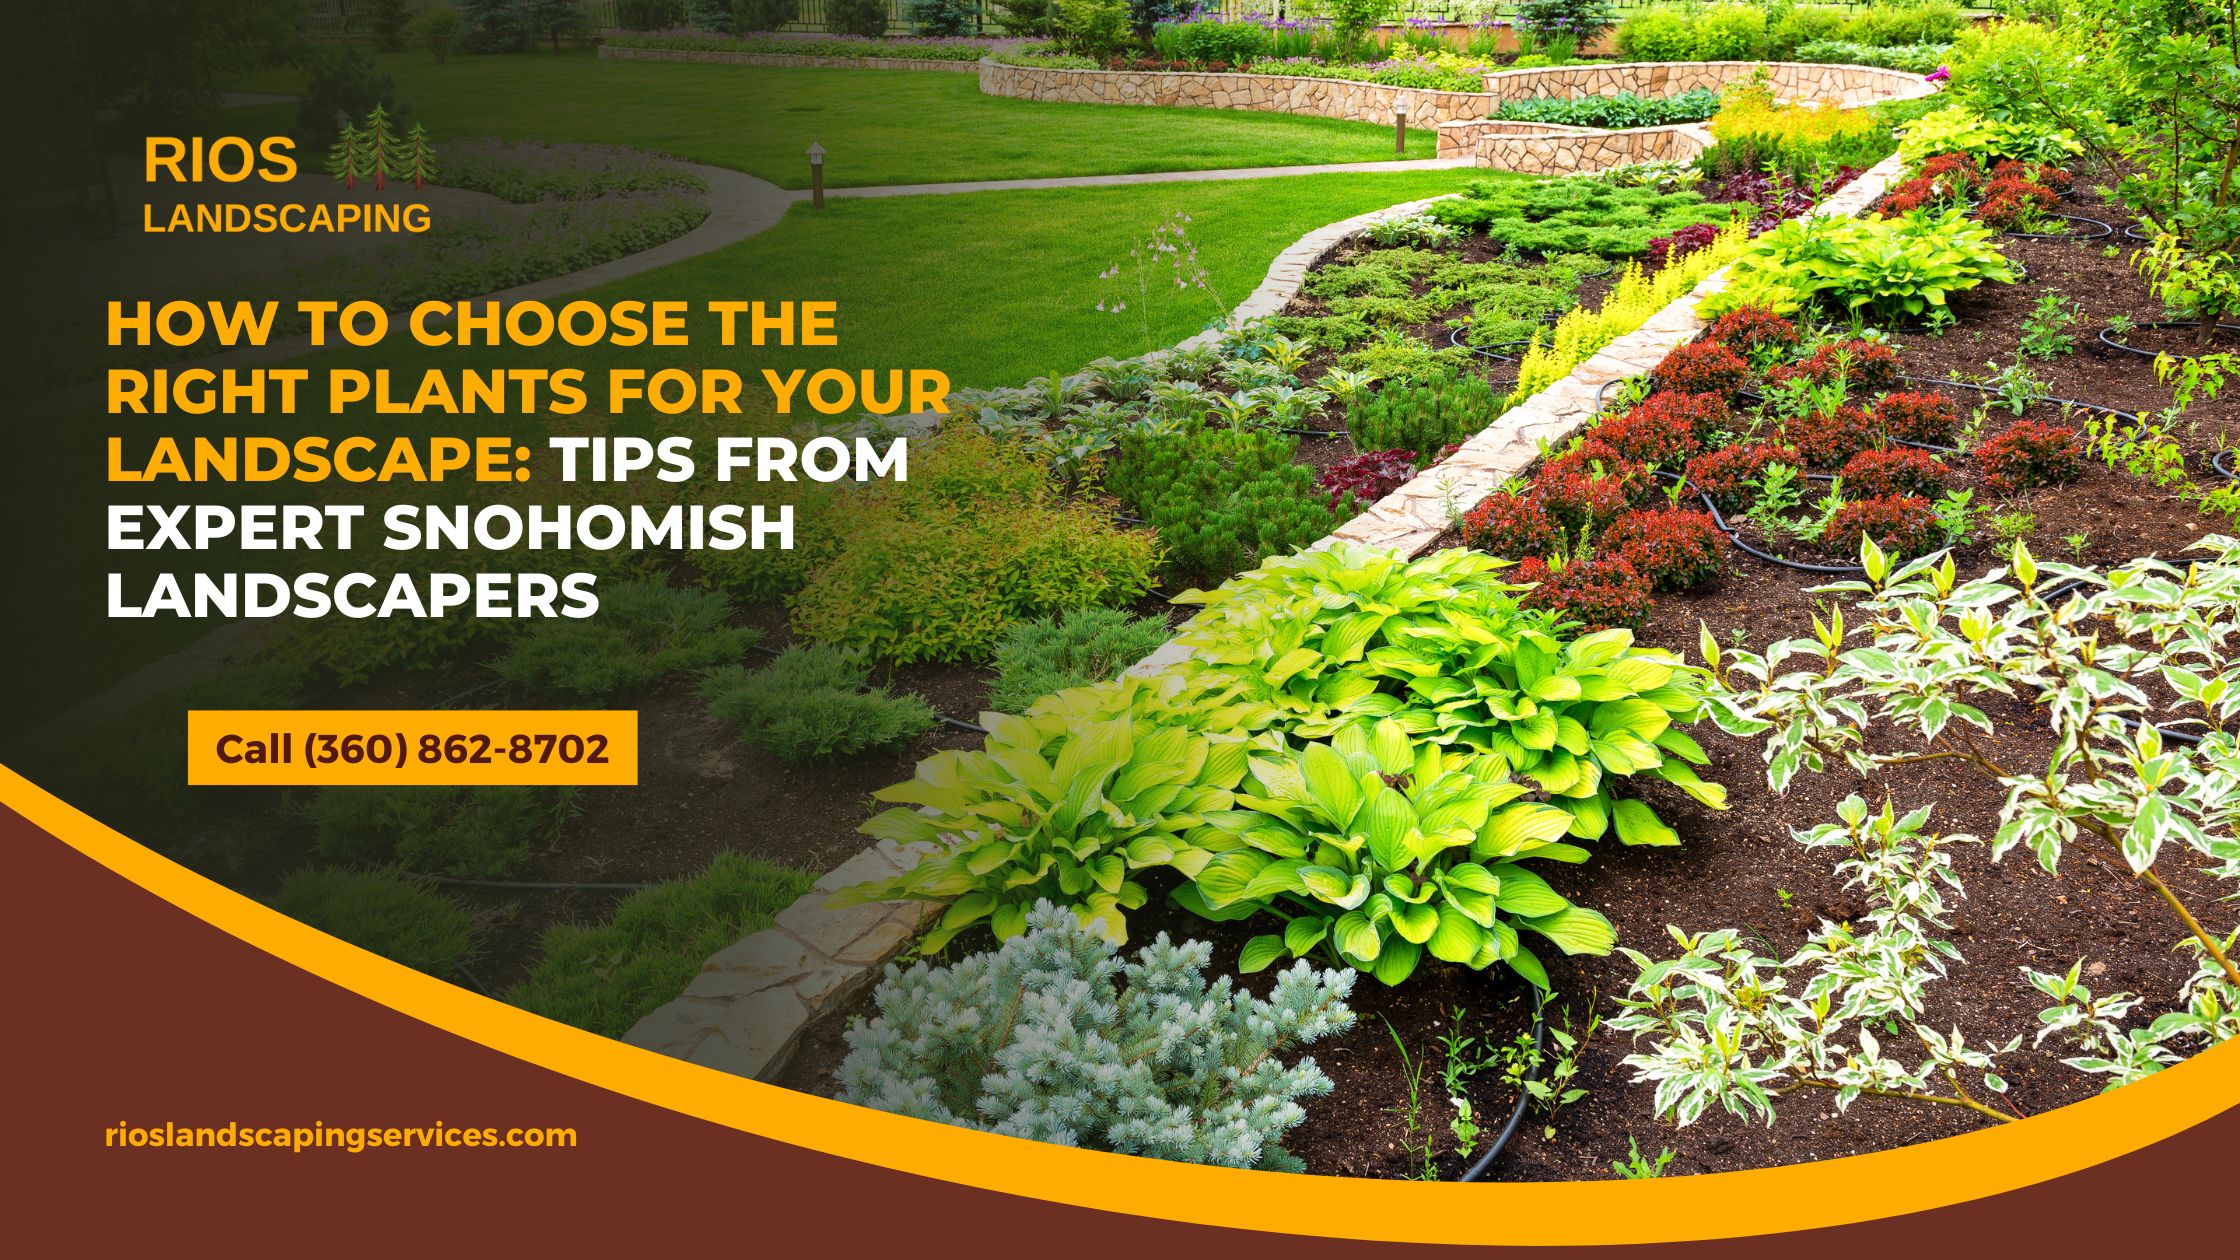 How to Choose the Right Plants for Your Landscape: Tips from Expert Snohomish Landscapers